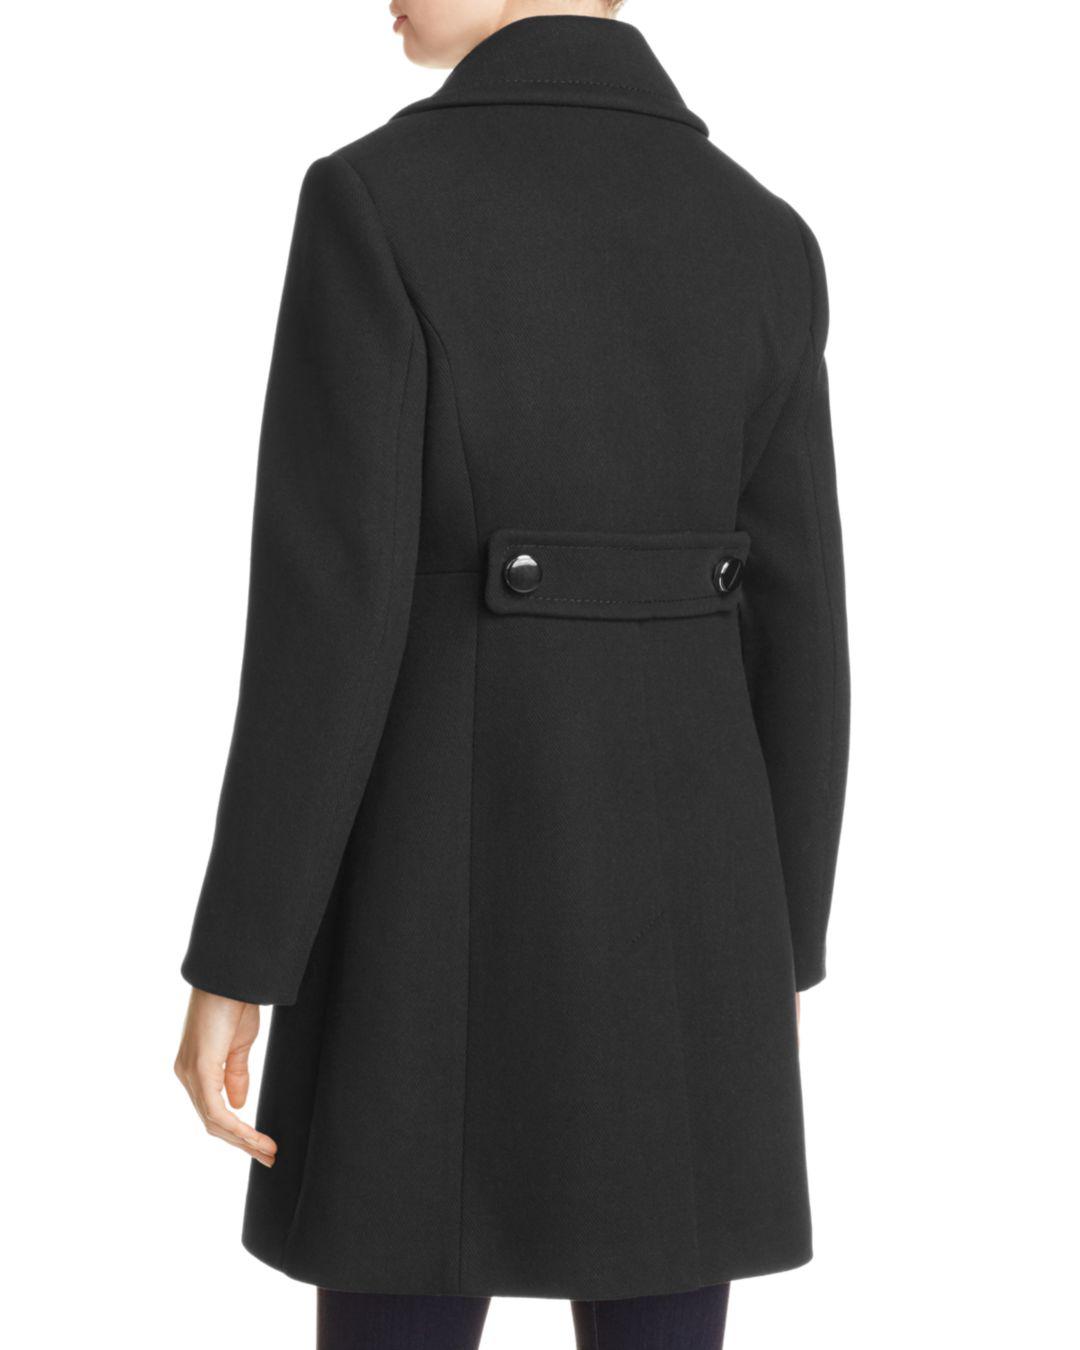 Kate Spade Double-breasted Coat in Black - Lyst